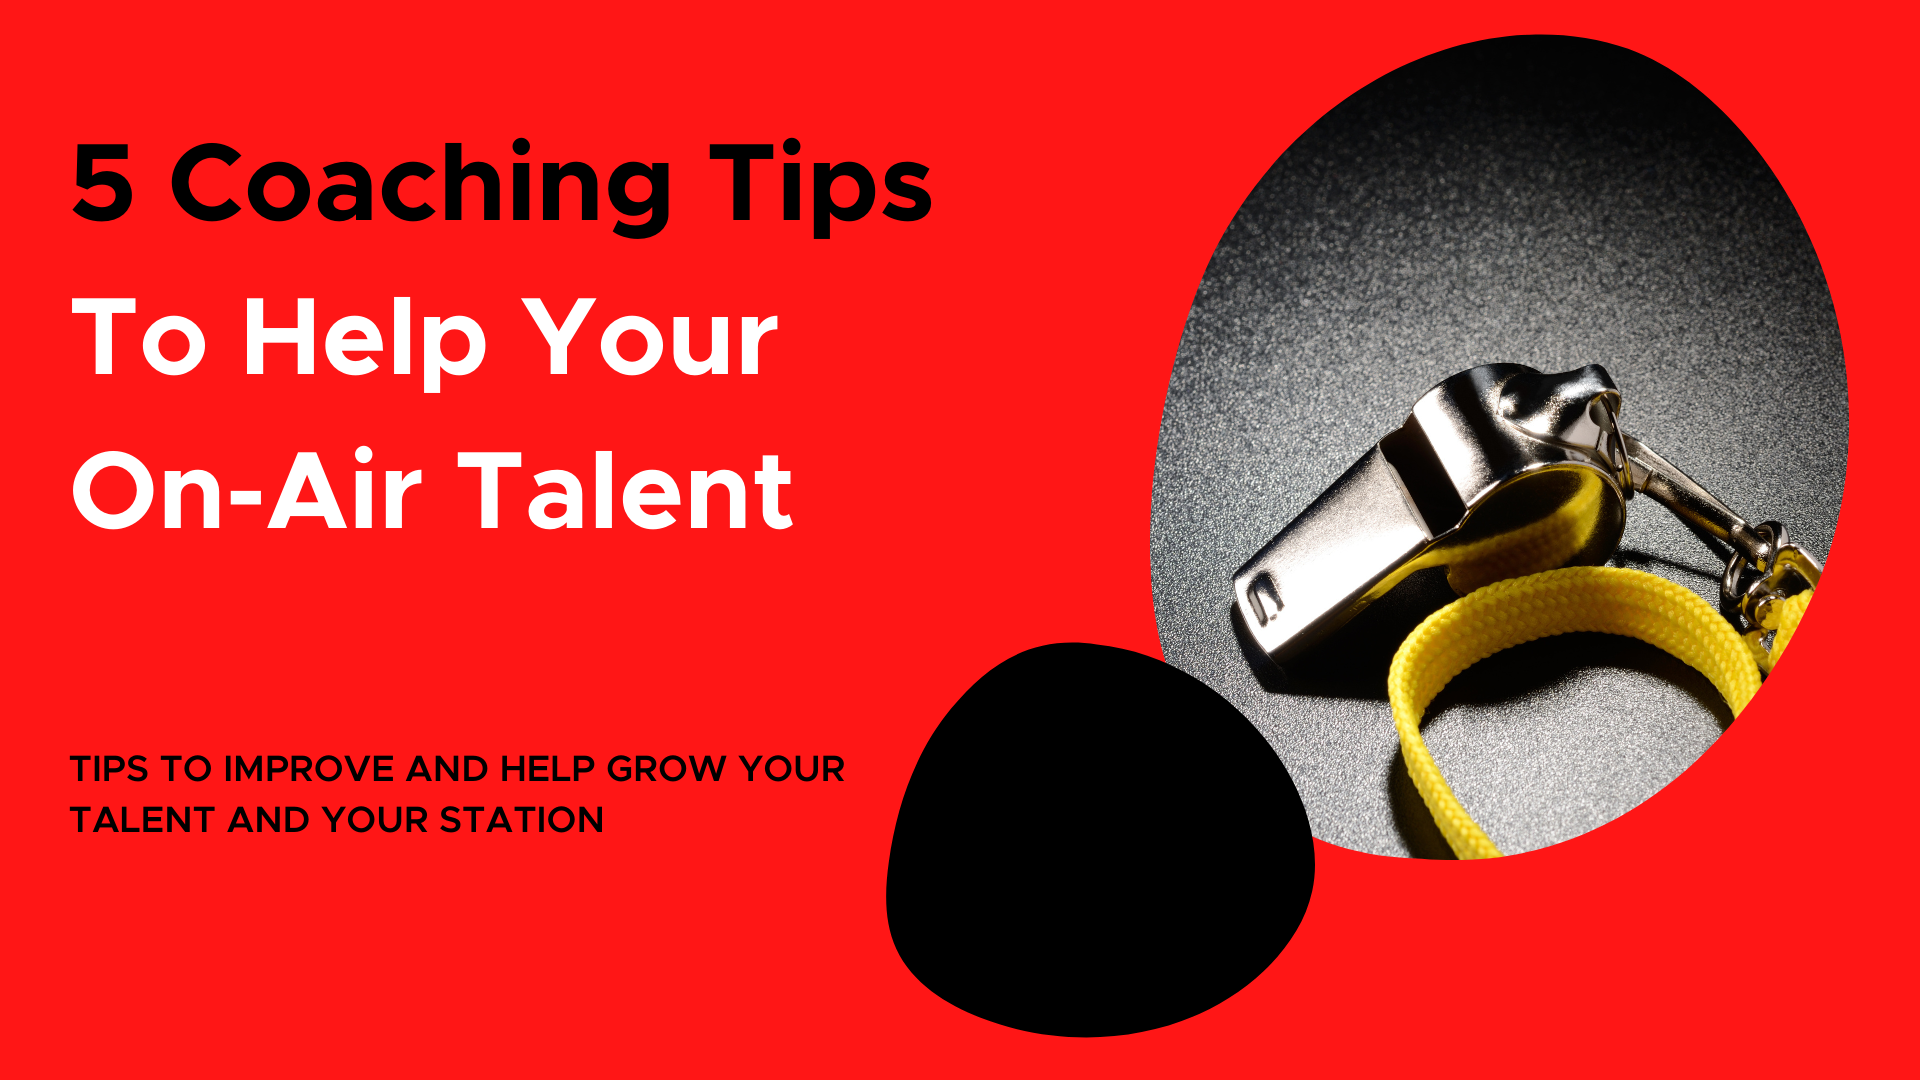 5 tips for talent (1920 x 237 px)